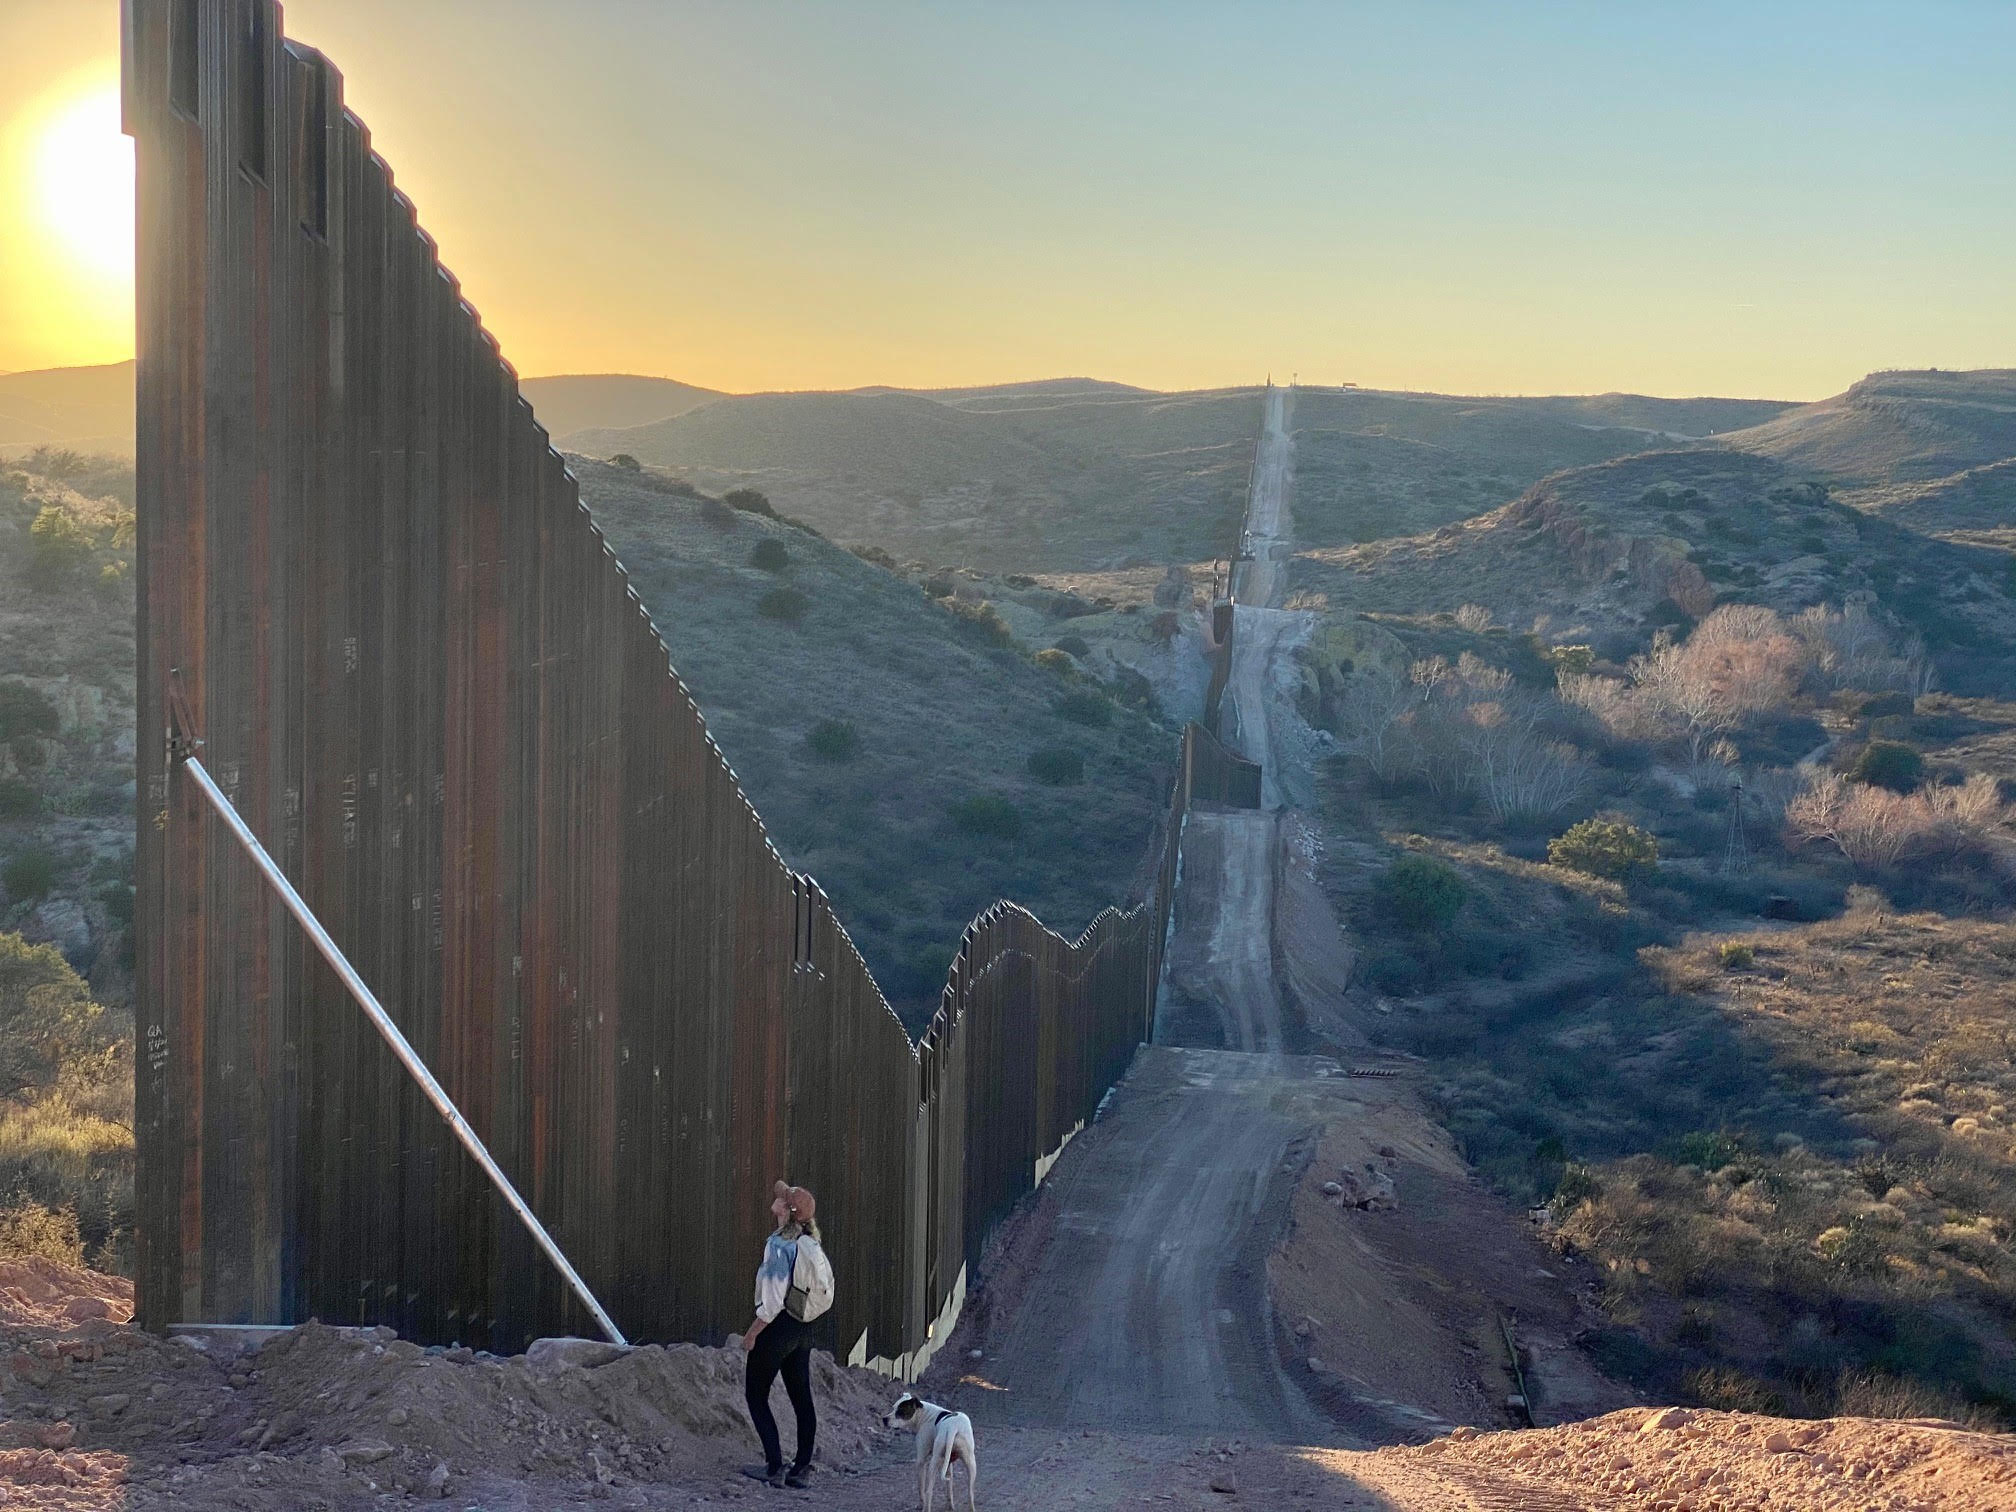 Tracing the ecological crisis along the U.S.-Mexico border to national security policy   